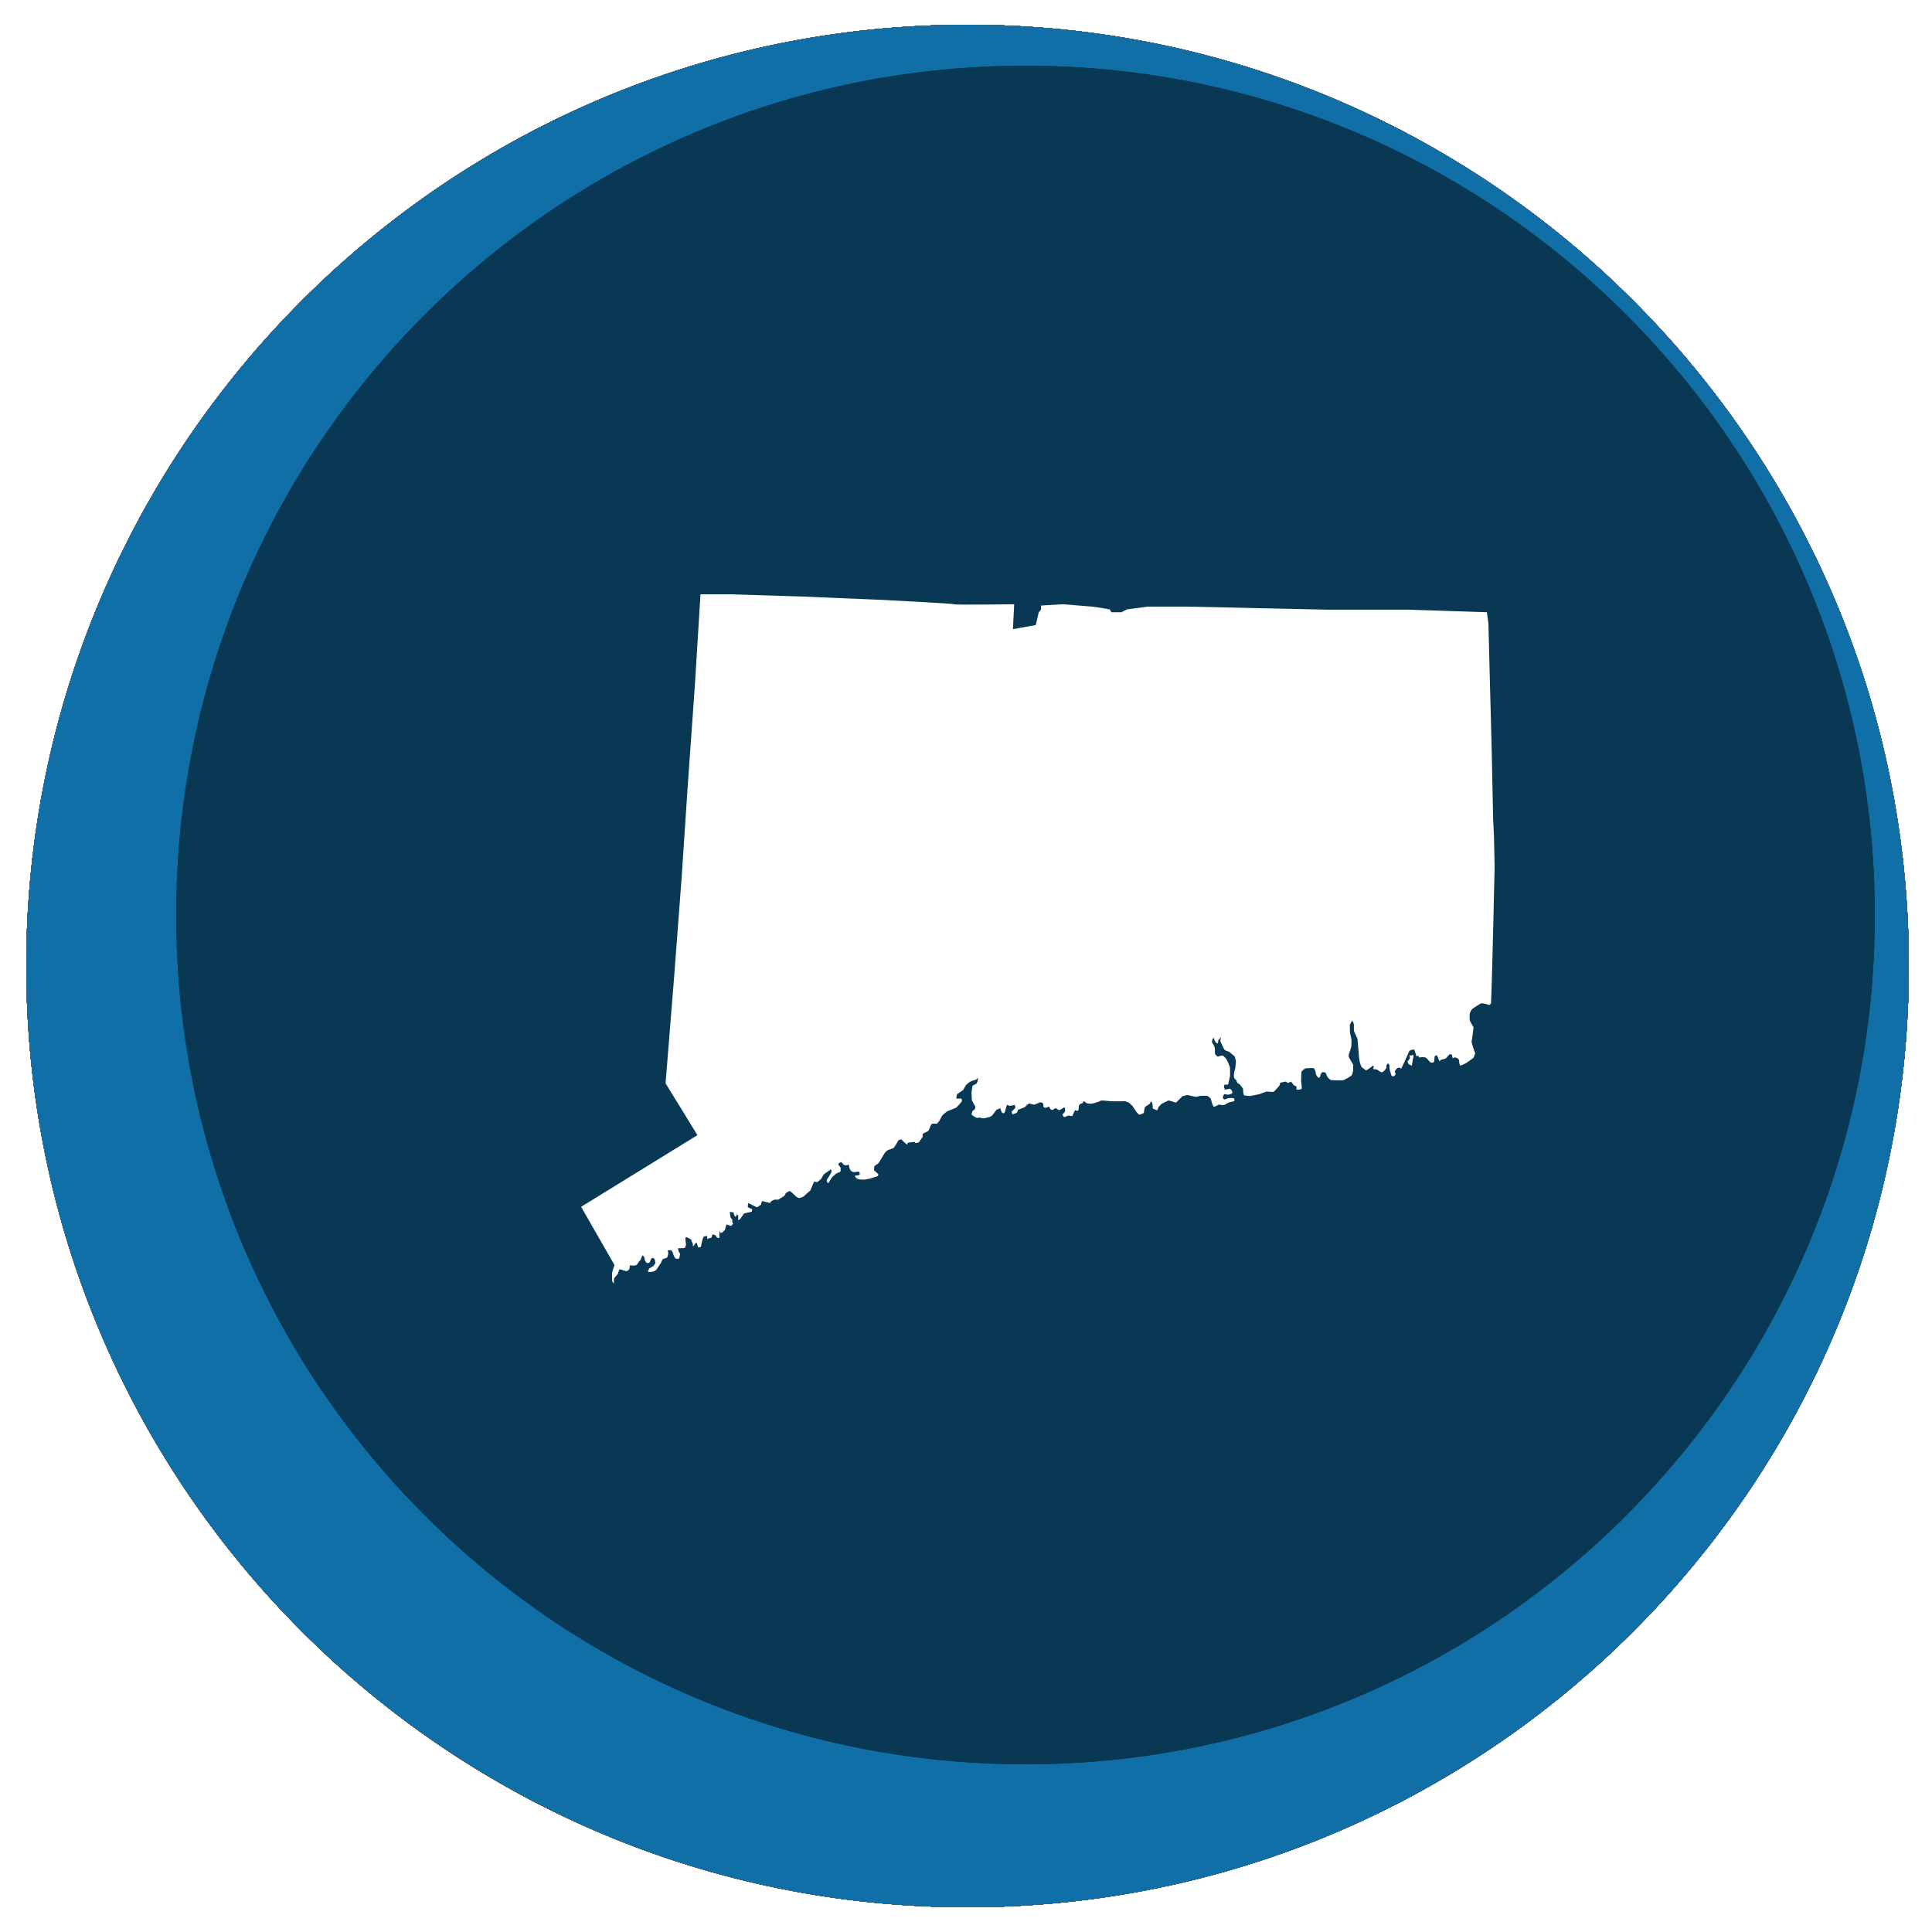 Connecticut state shape in a circle